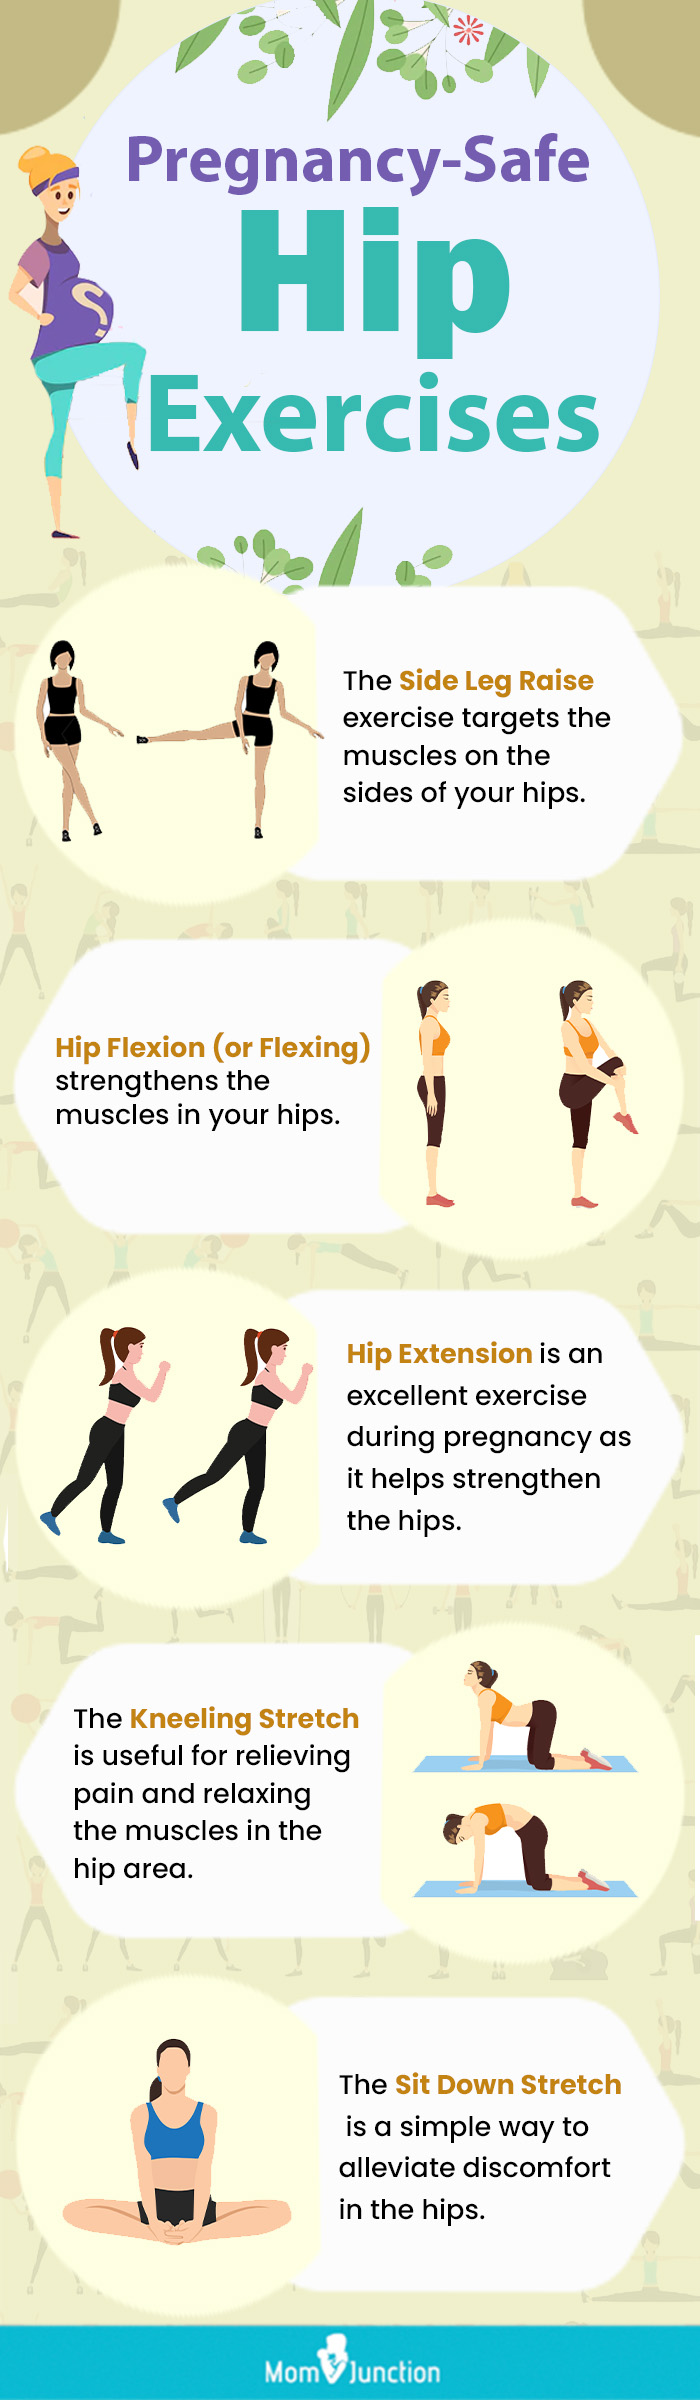 pregnancy safe hip exercises recovered (infographic)